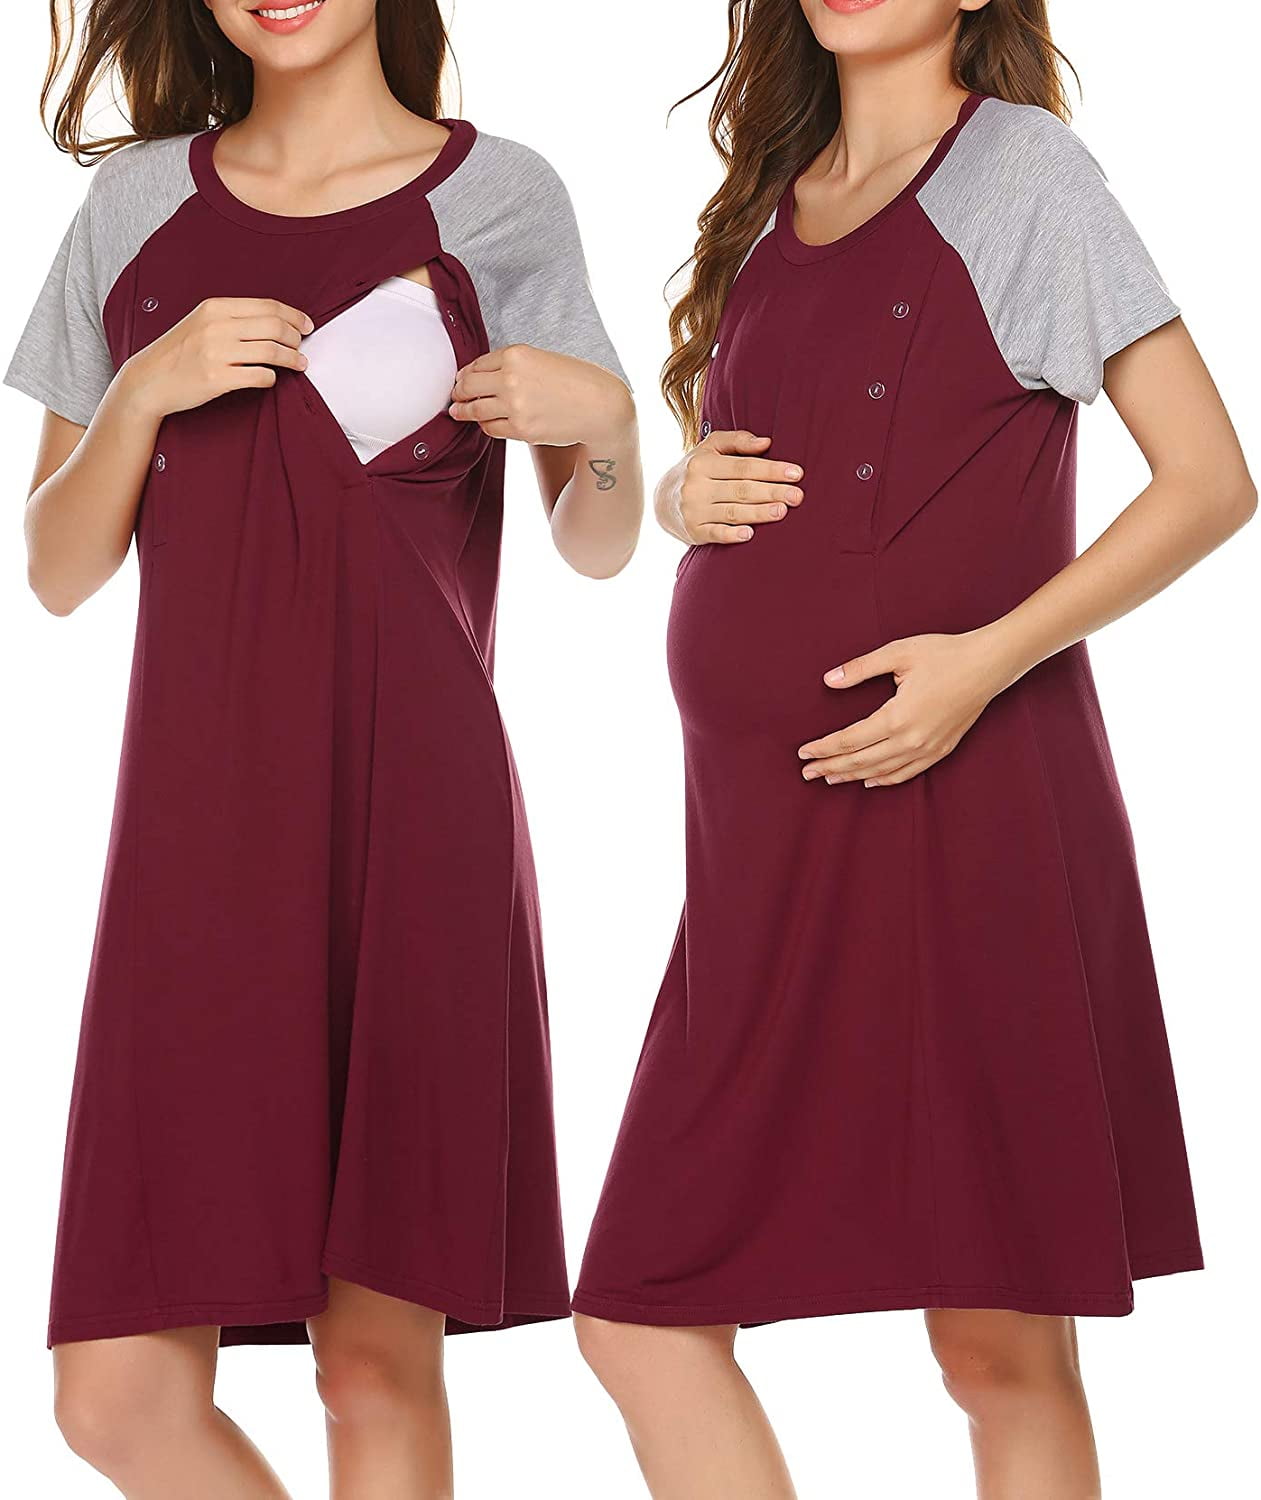 Women Delivery/Labor/Nursing Nightgown Hospital Maternity Gown